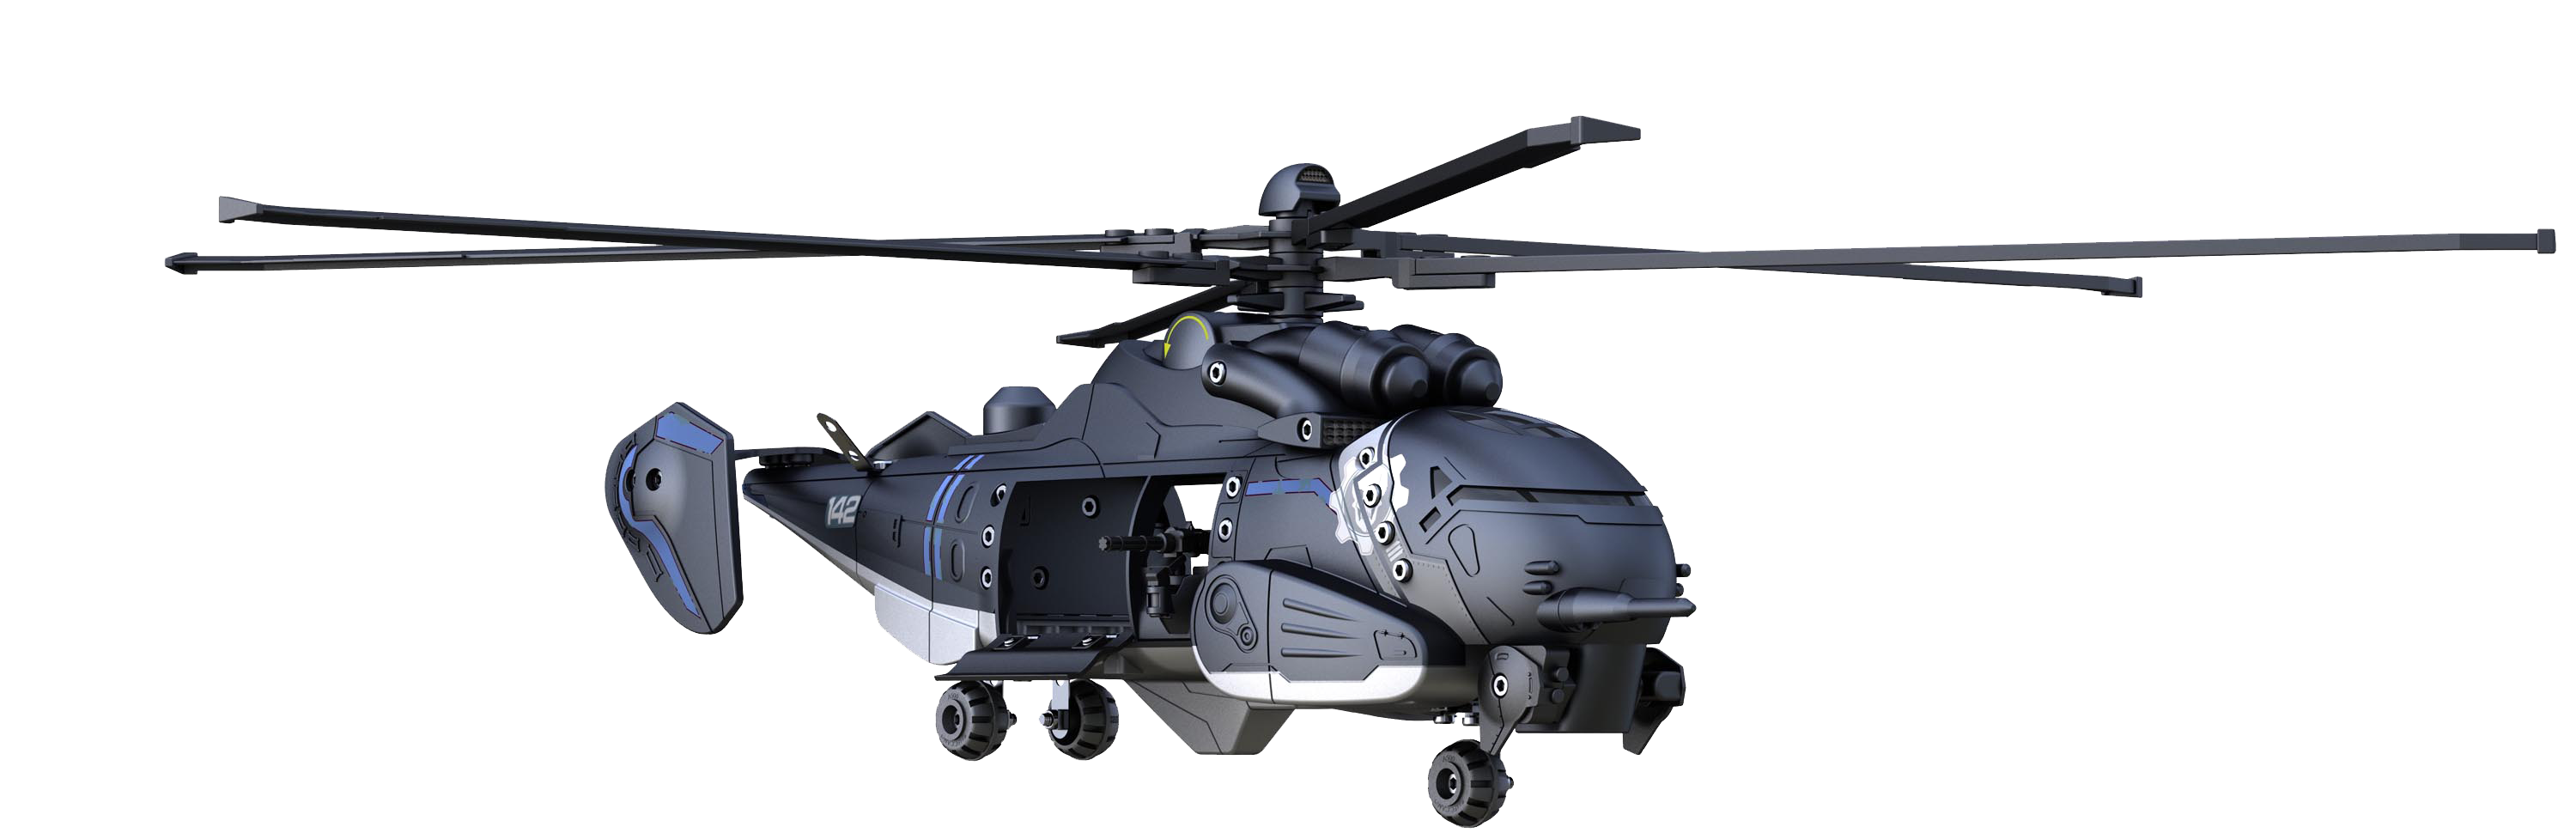 Army Helicopter Free Png Image PNG Image